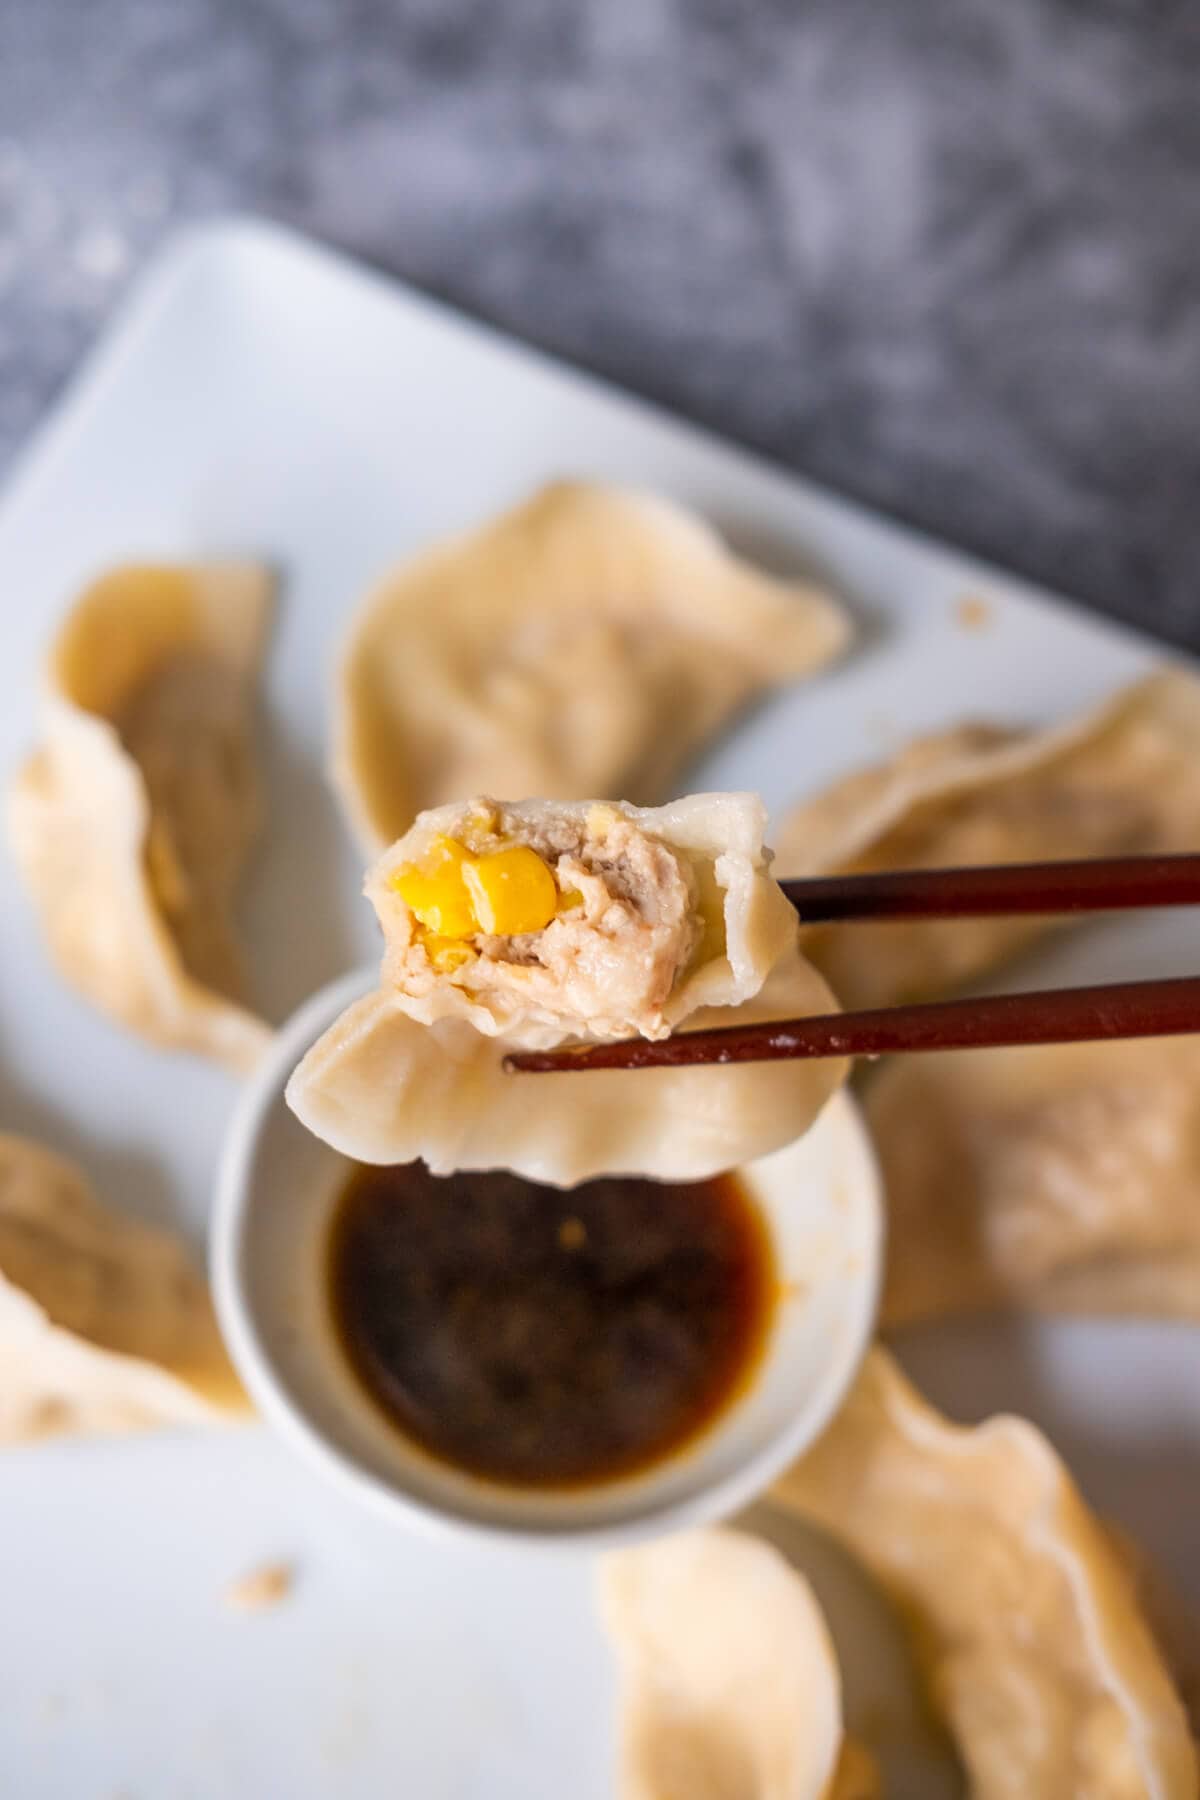 A half cut dumpling revealing its pork, shrimp, and sweet corn filling being held by a chopstick over a bowl of vinegar sitting in the center of a plate of dumplings. 